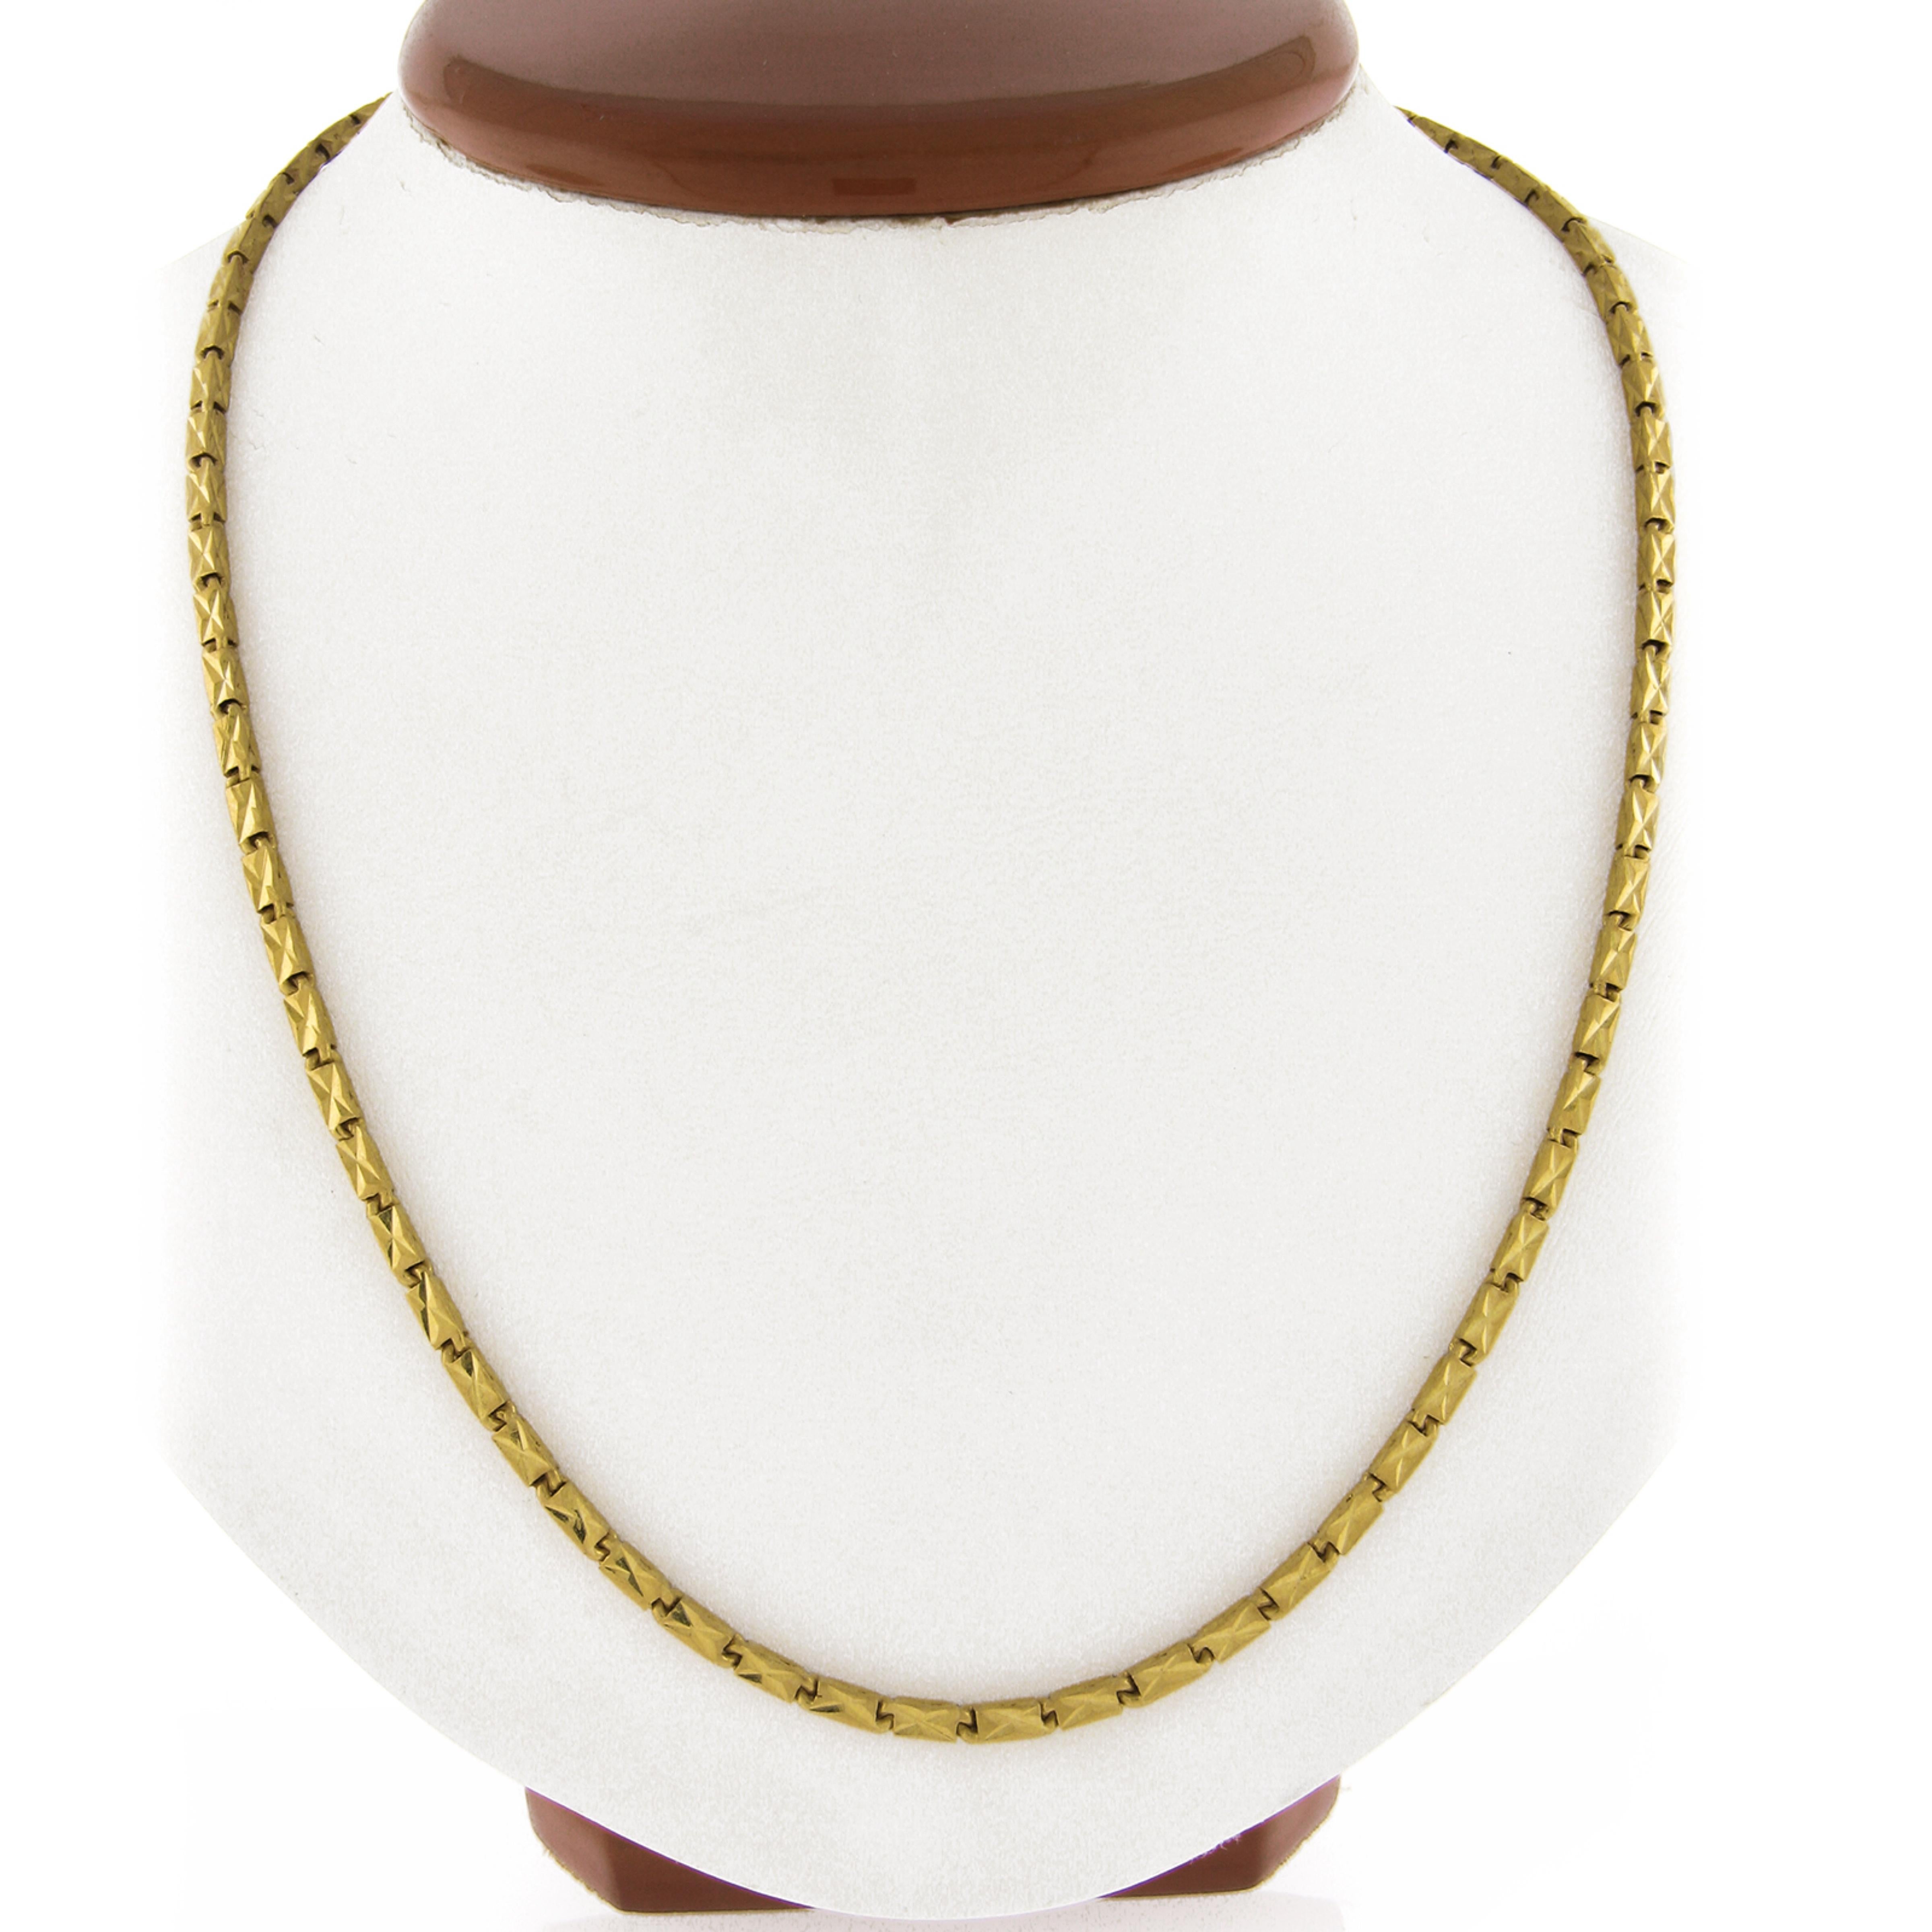 Here we have a beautiful chain necklace that was crafted from solid 23k yellow gold. It is secured with a sturdy Double 